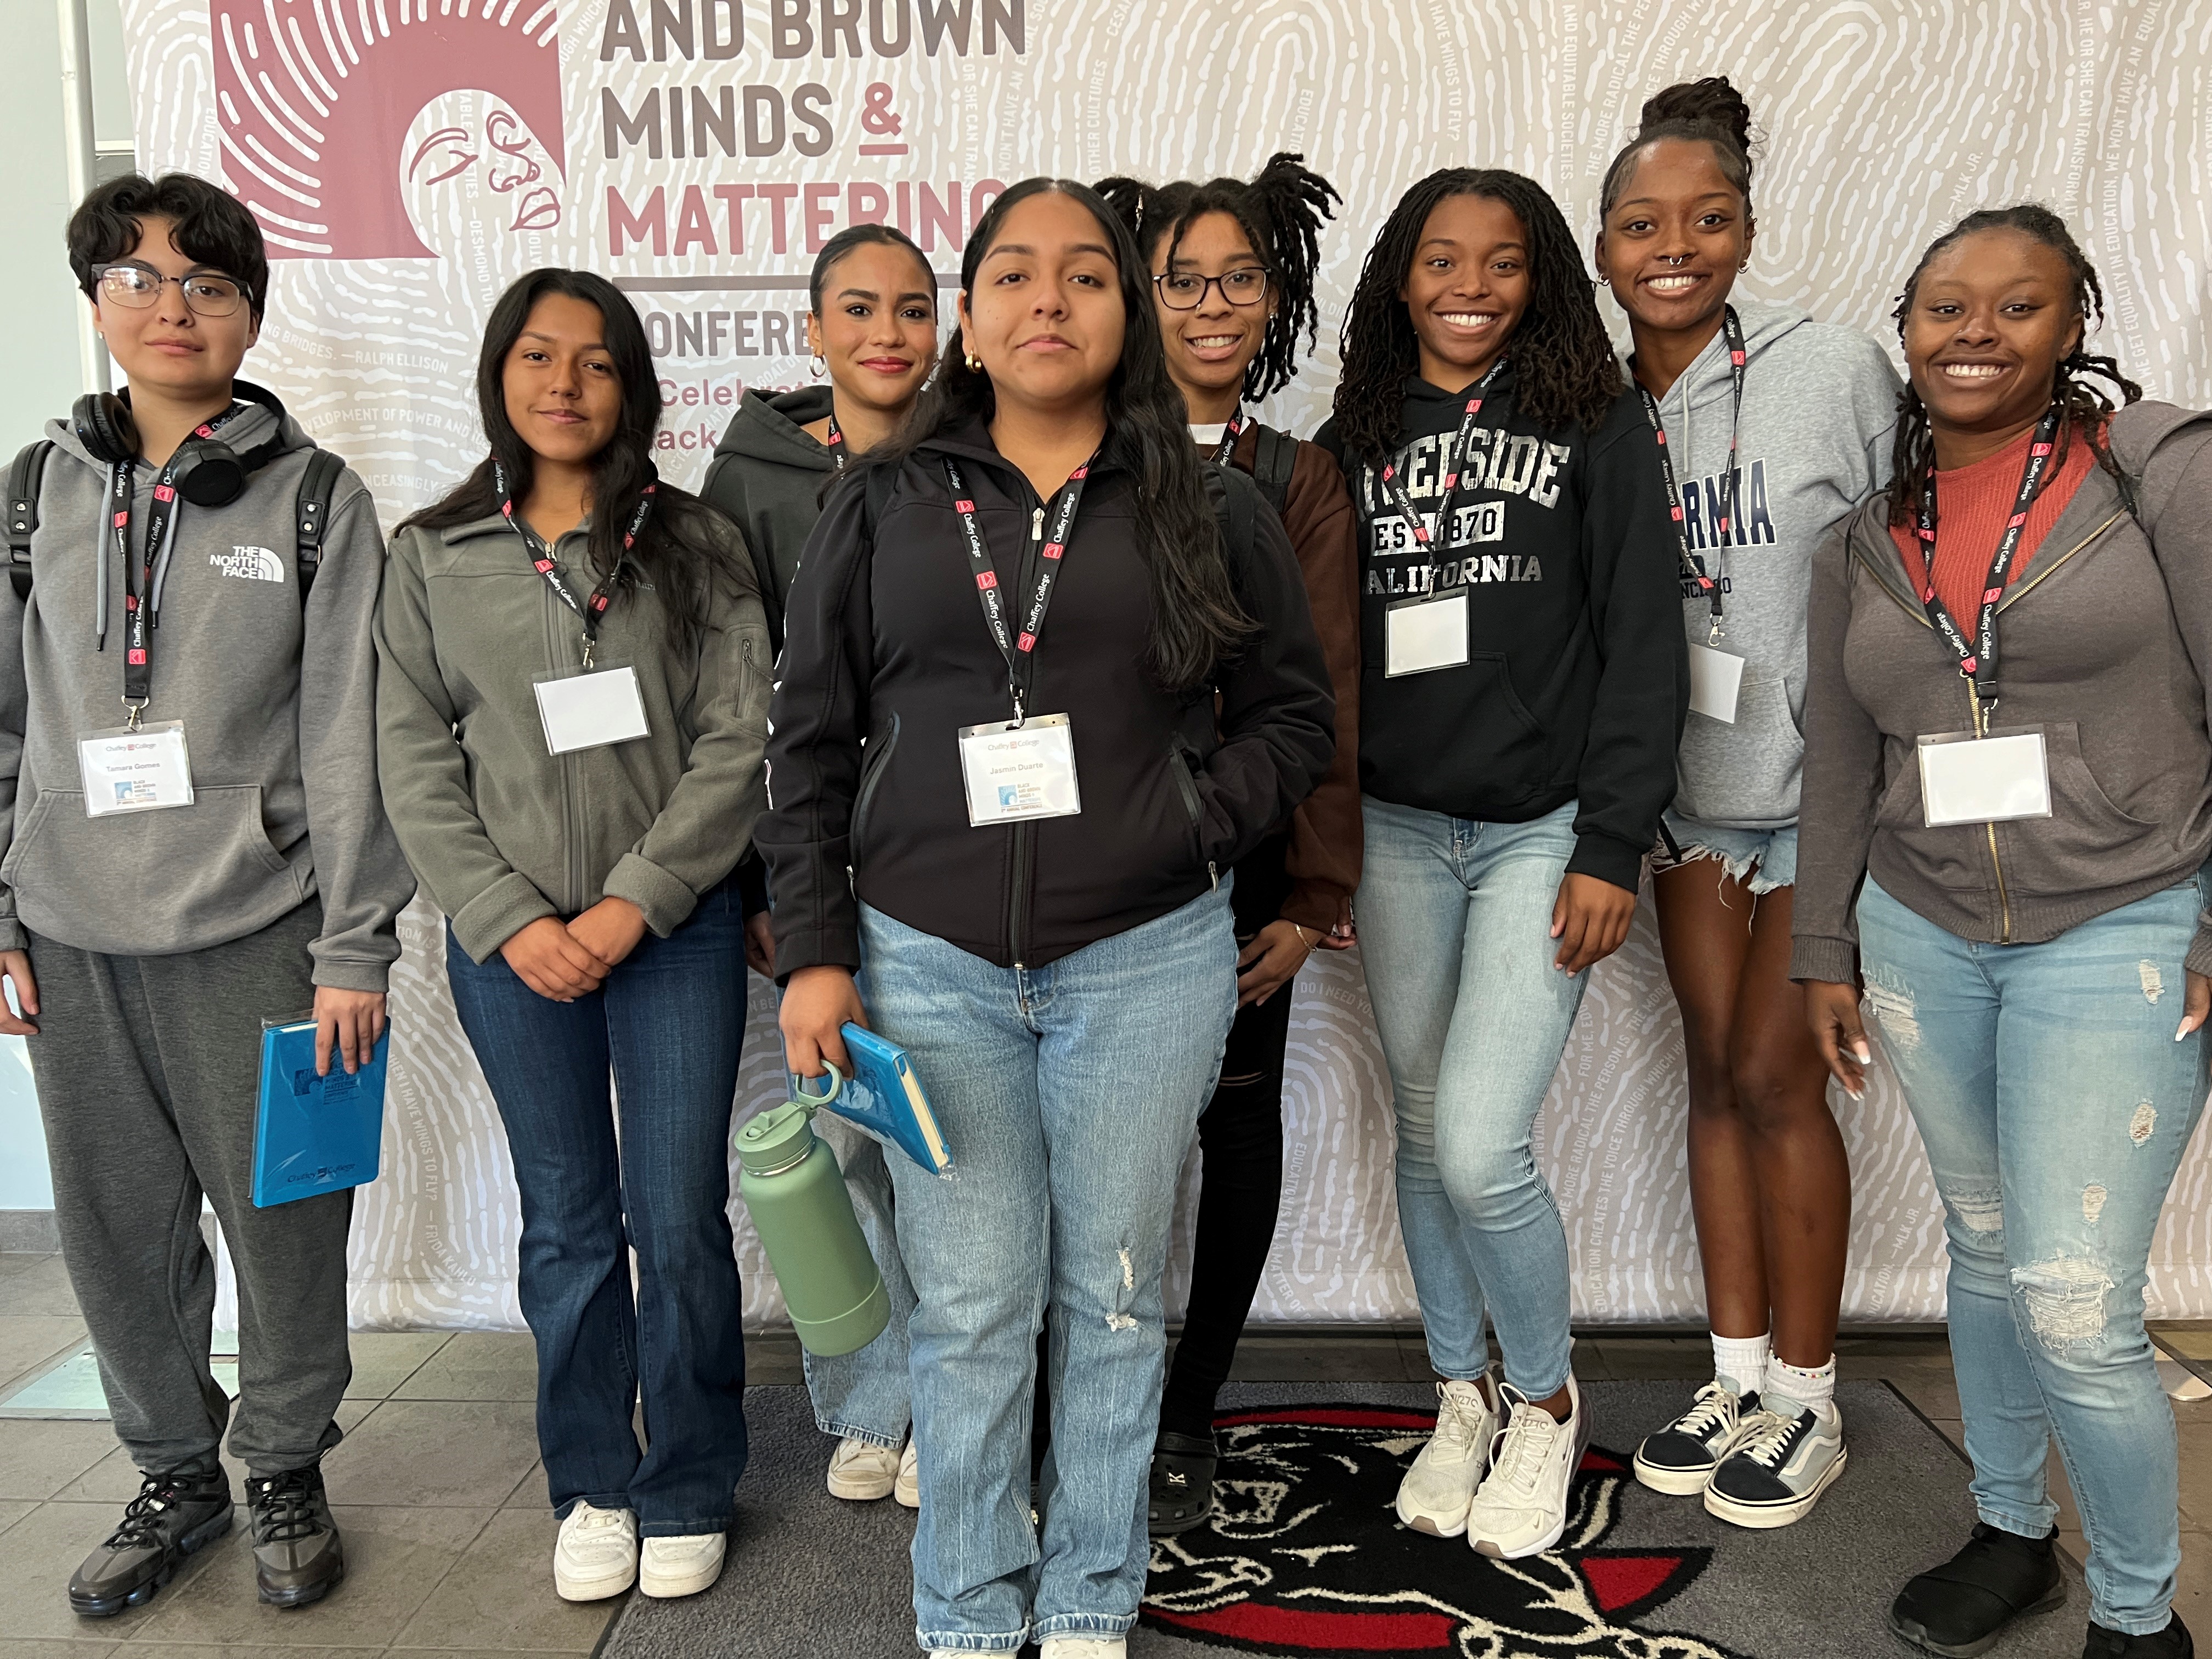 High school students attend the BBMM conference